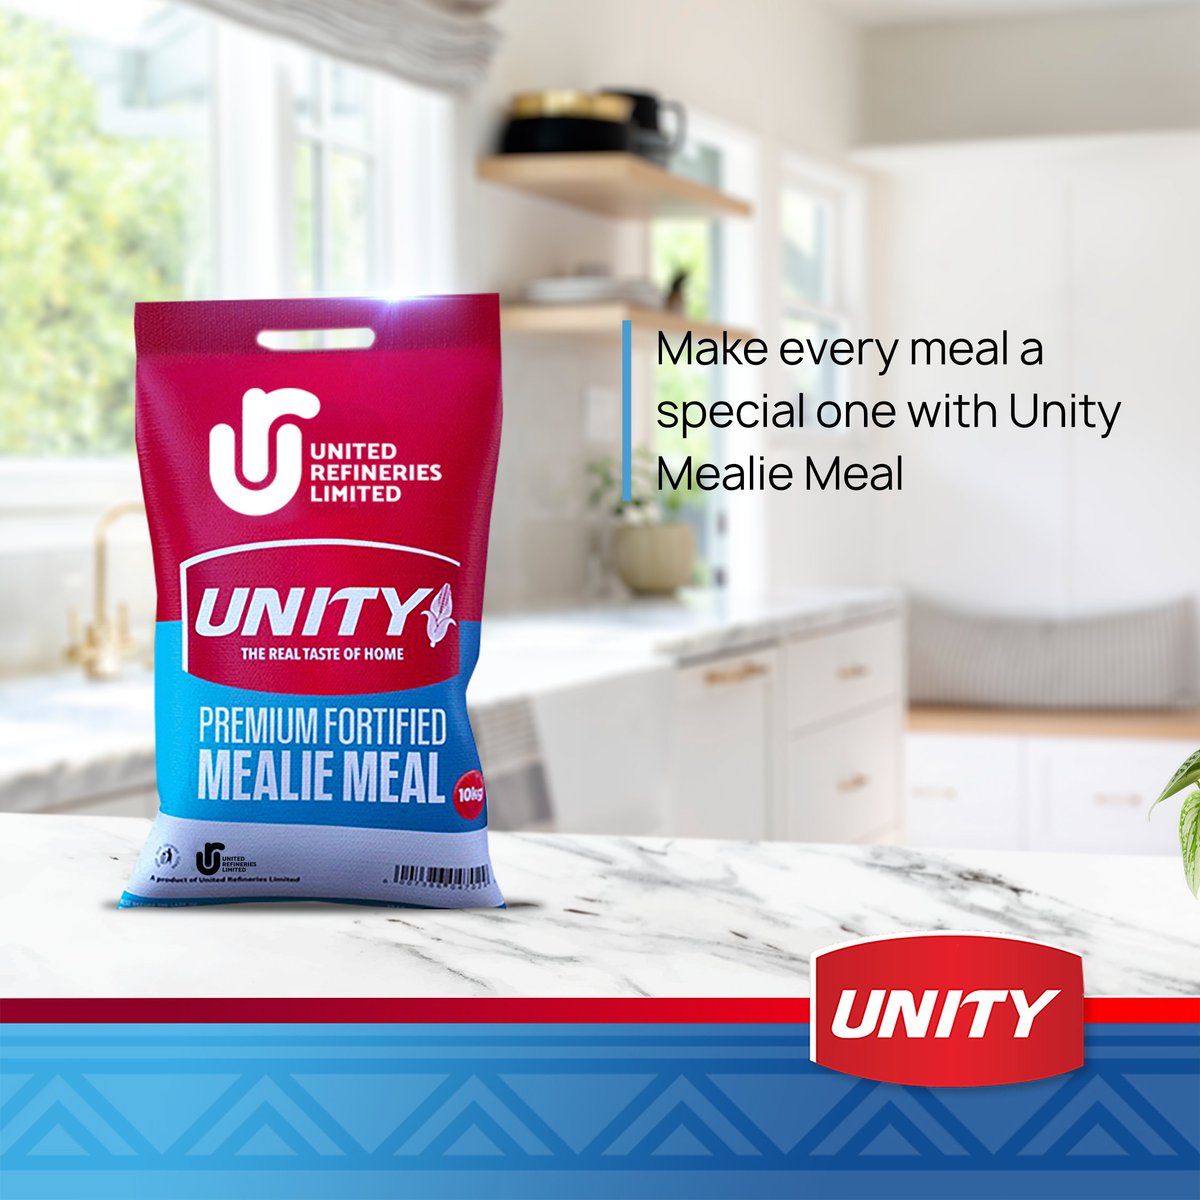 Make every meal a special one with Unity Mealie Meal. It's nutritious, tasty and filling. #unitymealiemeal #TheTrueTasteofHome